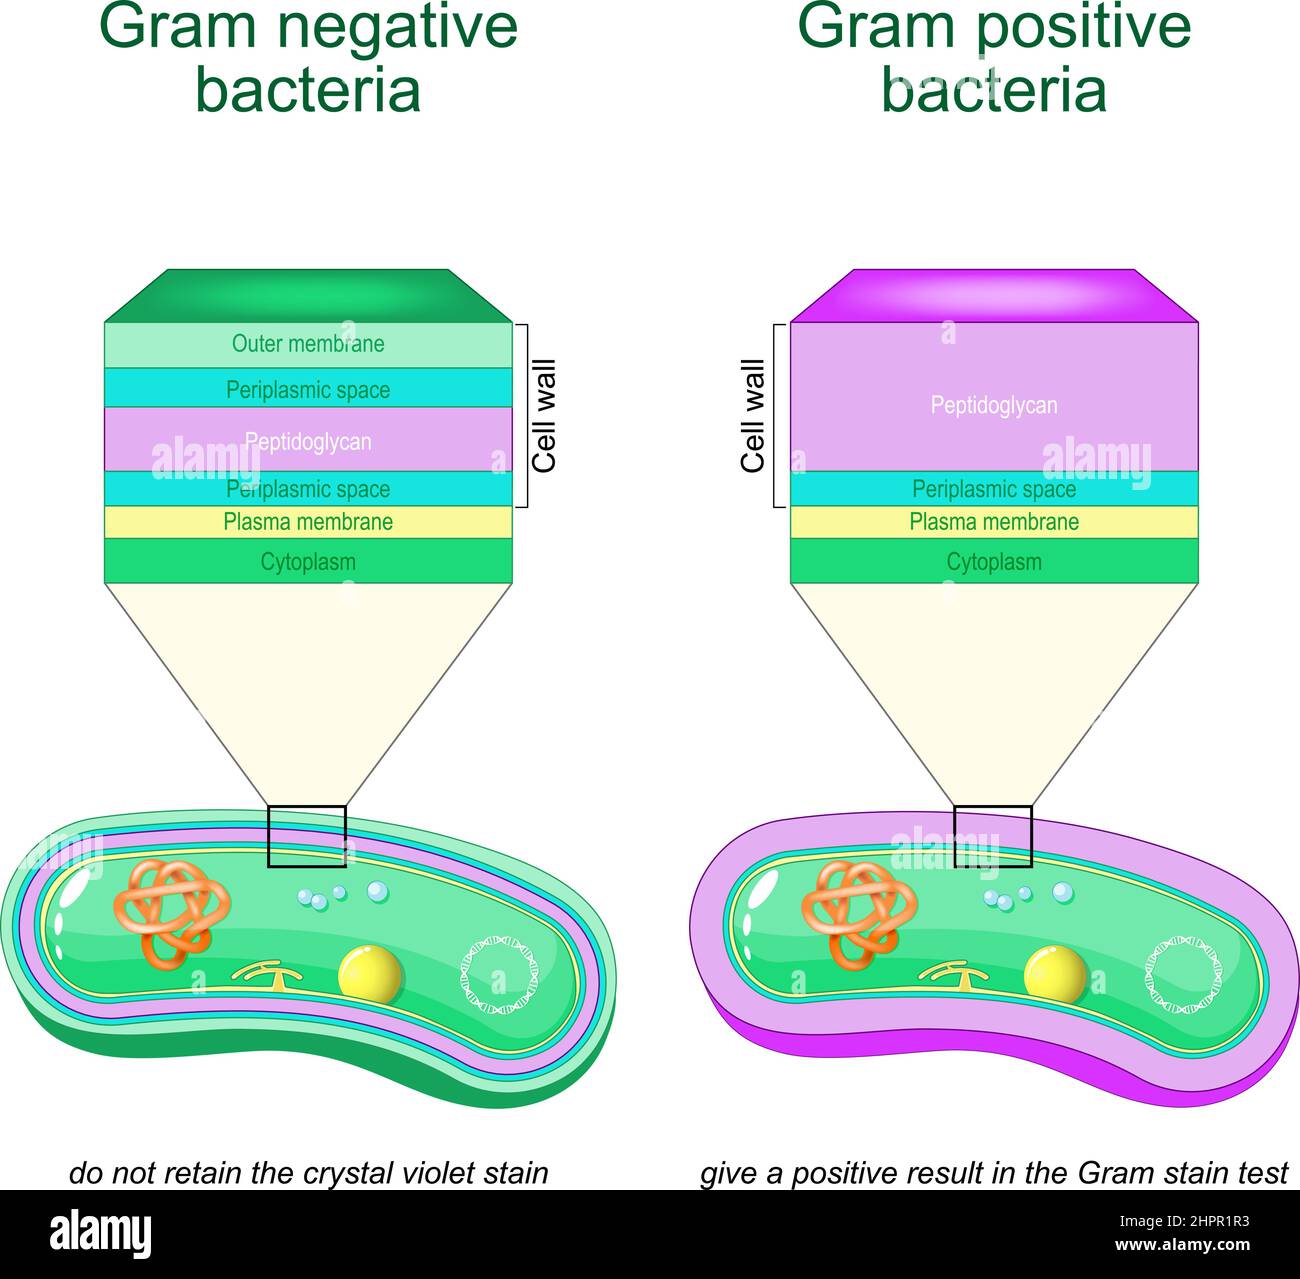 Gram negative bacteria do not retain the crystal violet stain. Gram positive bacteria give a positive result in the Gram stain test. comparison Stock Vector